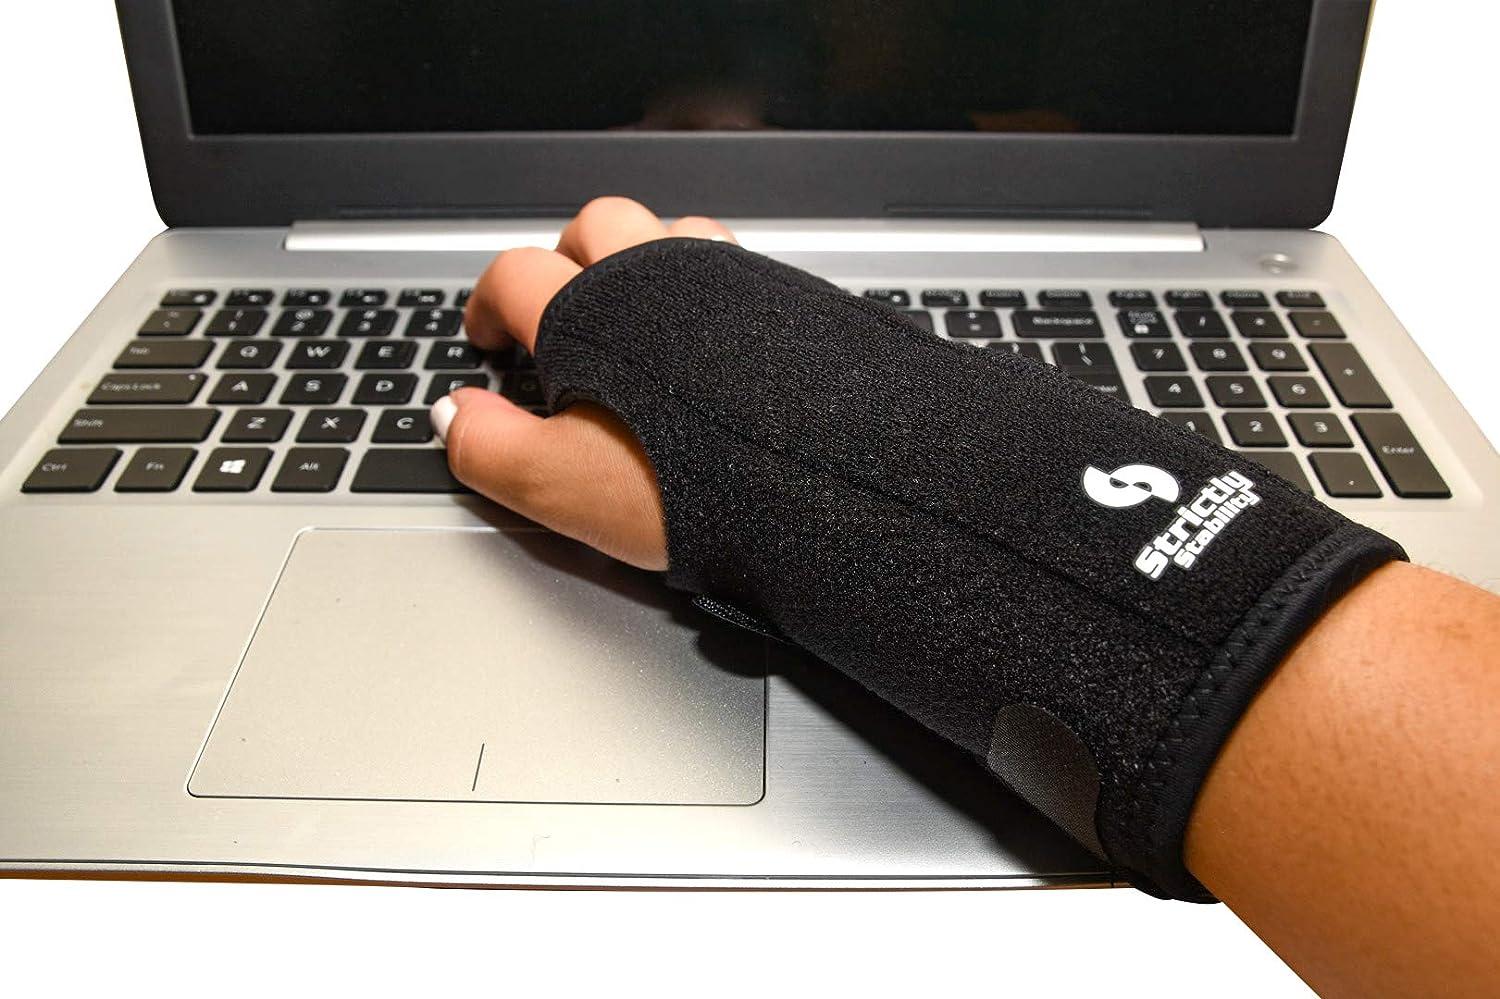 StrictlyStability Wrist Brace for Carpal Tunnel, Arthritis, Tendonitis  Support Fitting Both Hands (Universal)